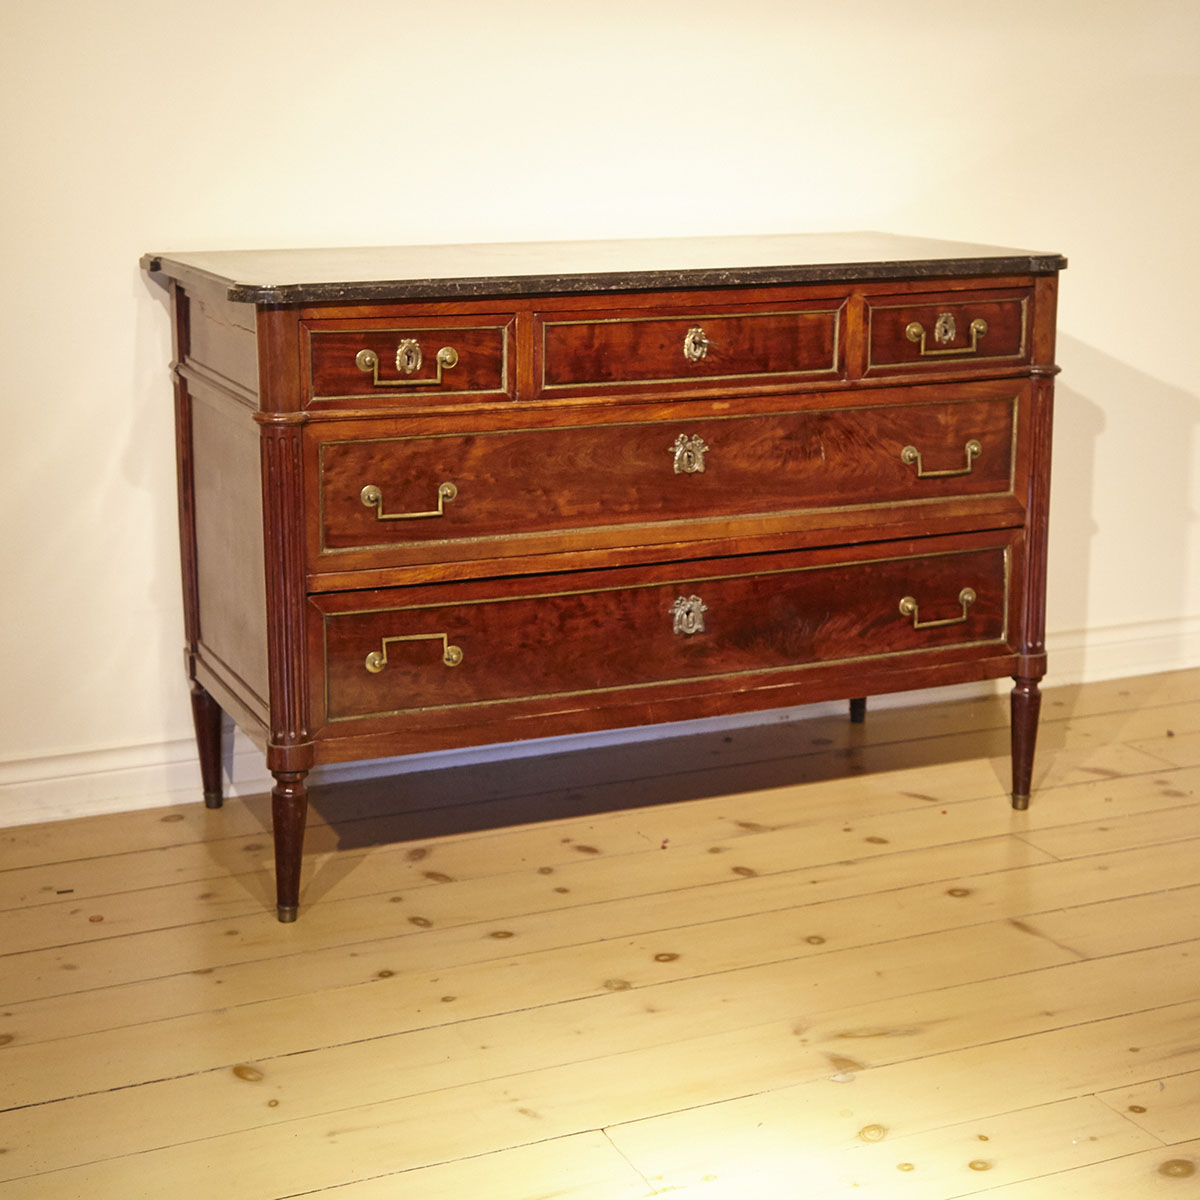 French Empire Mahogany Chest of Three Drawers, early 19th century